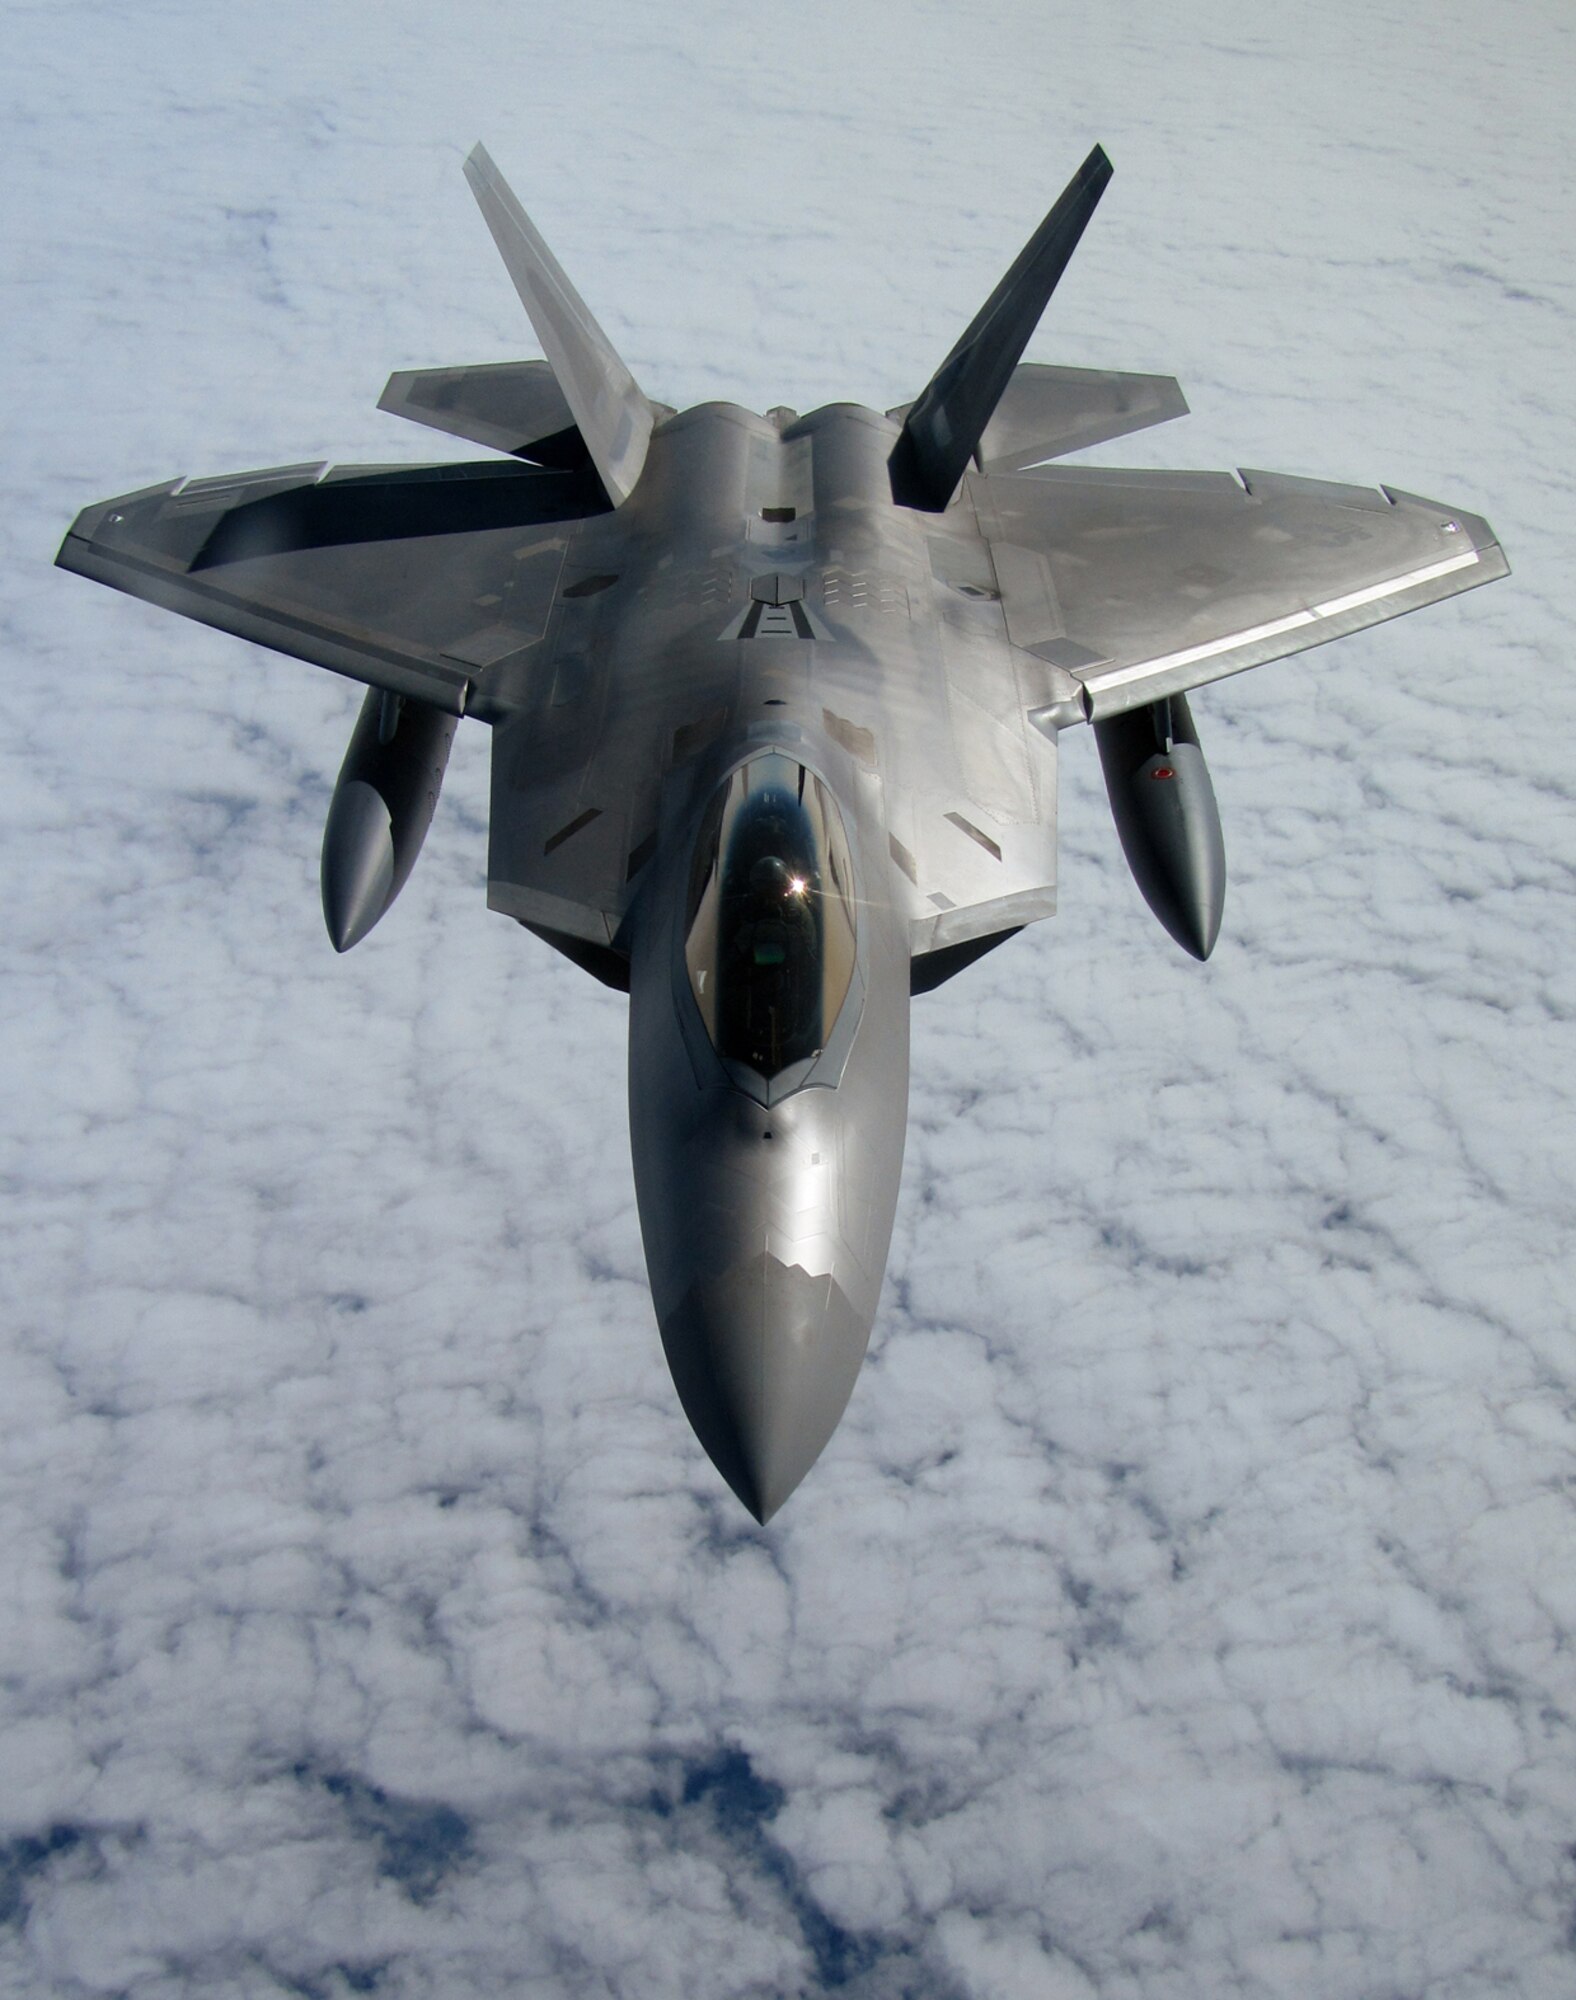 RAF MILDENHALL, England -- High above the Atlantic Ocean, an F-22 Raptor from Elmendorf Air Force Base, Alaska, trails a 100th Air Refueling Wing KC-135.  By sticking close to the tanker, the fighter could regularly top off its fuel tanks to ensure it had enough fuel to reach safety in the event it had to land unexpectedly.  (U.S. Air Force photo/Staff Sgt. Austin M. May)